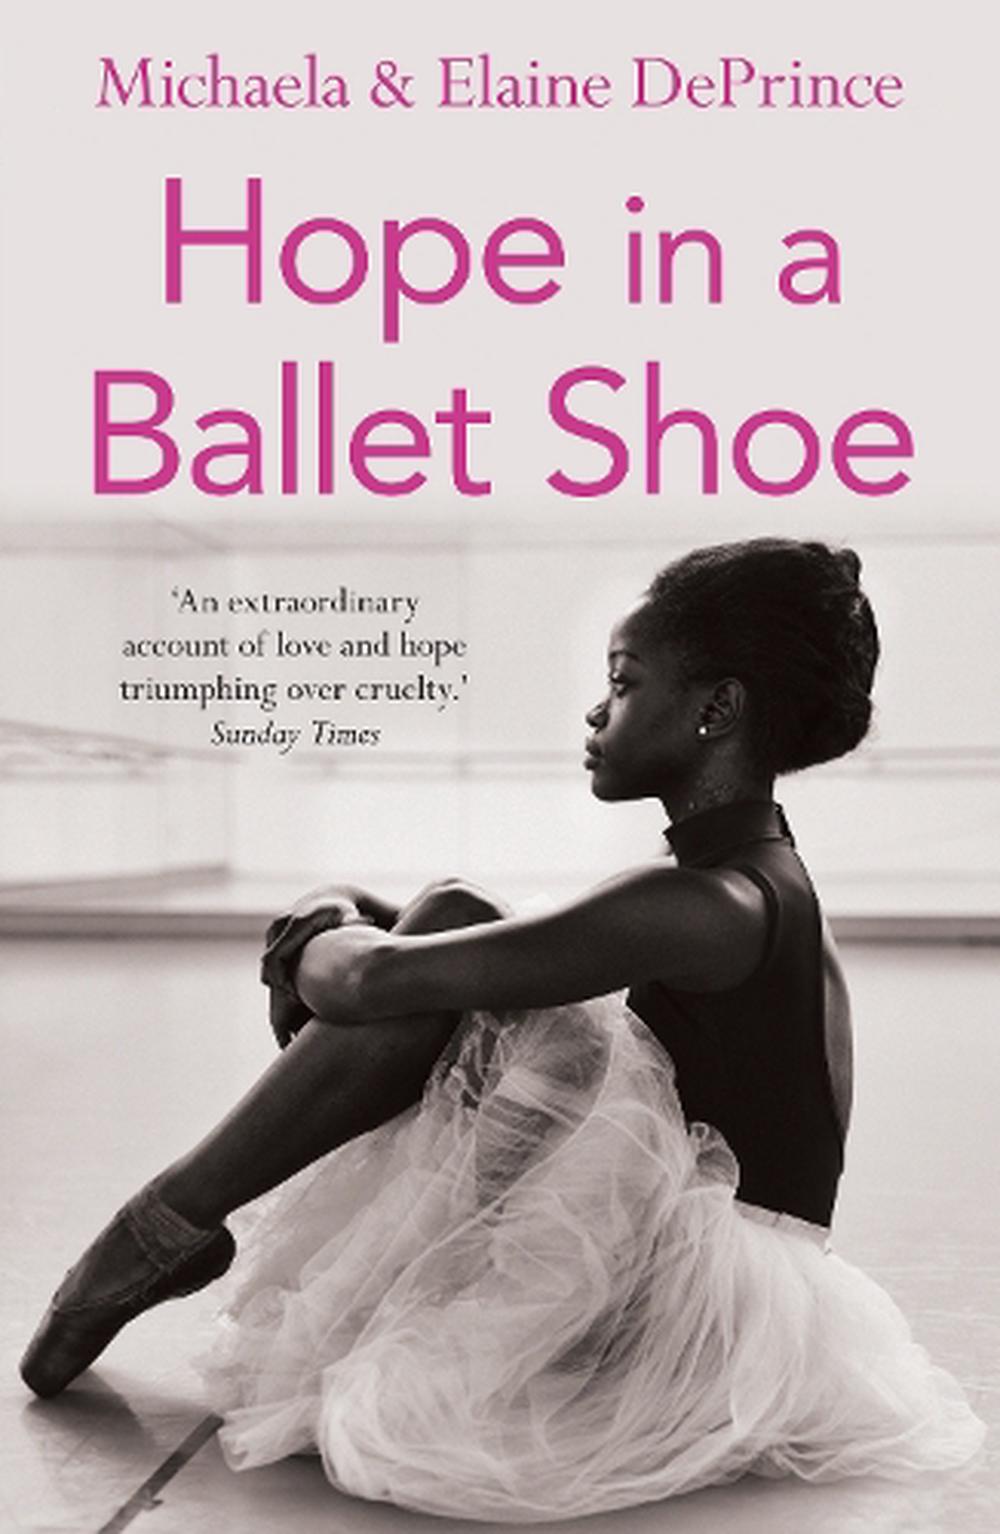 Buy　a　Paperback,　by　Michaela　Hope　Ballet　online　DePrince,　The　in　Shoe　at　9780571314478　Nile